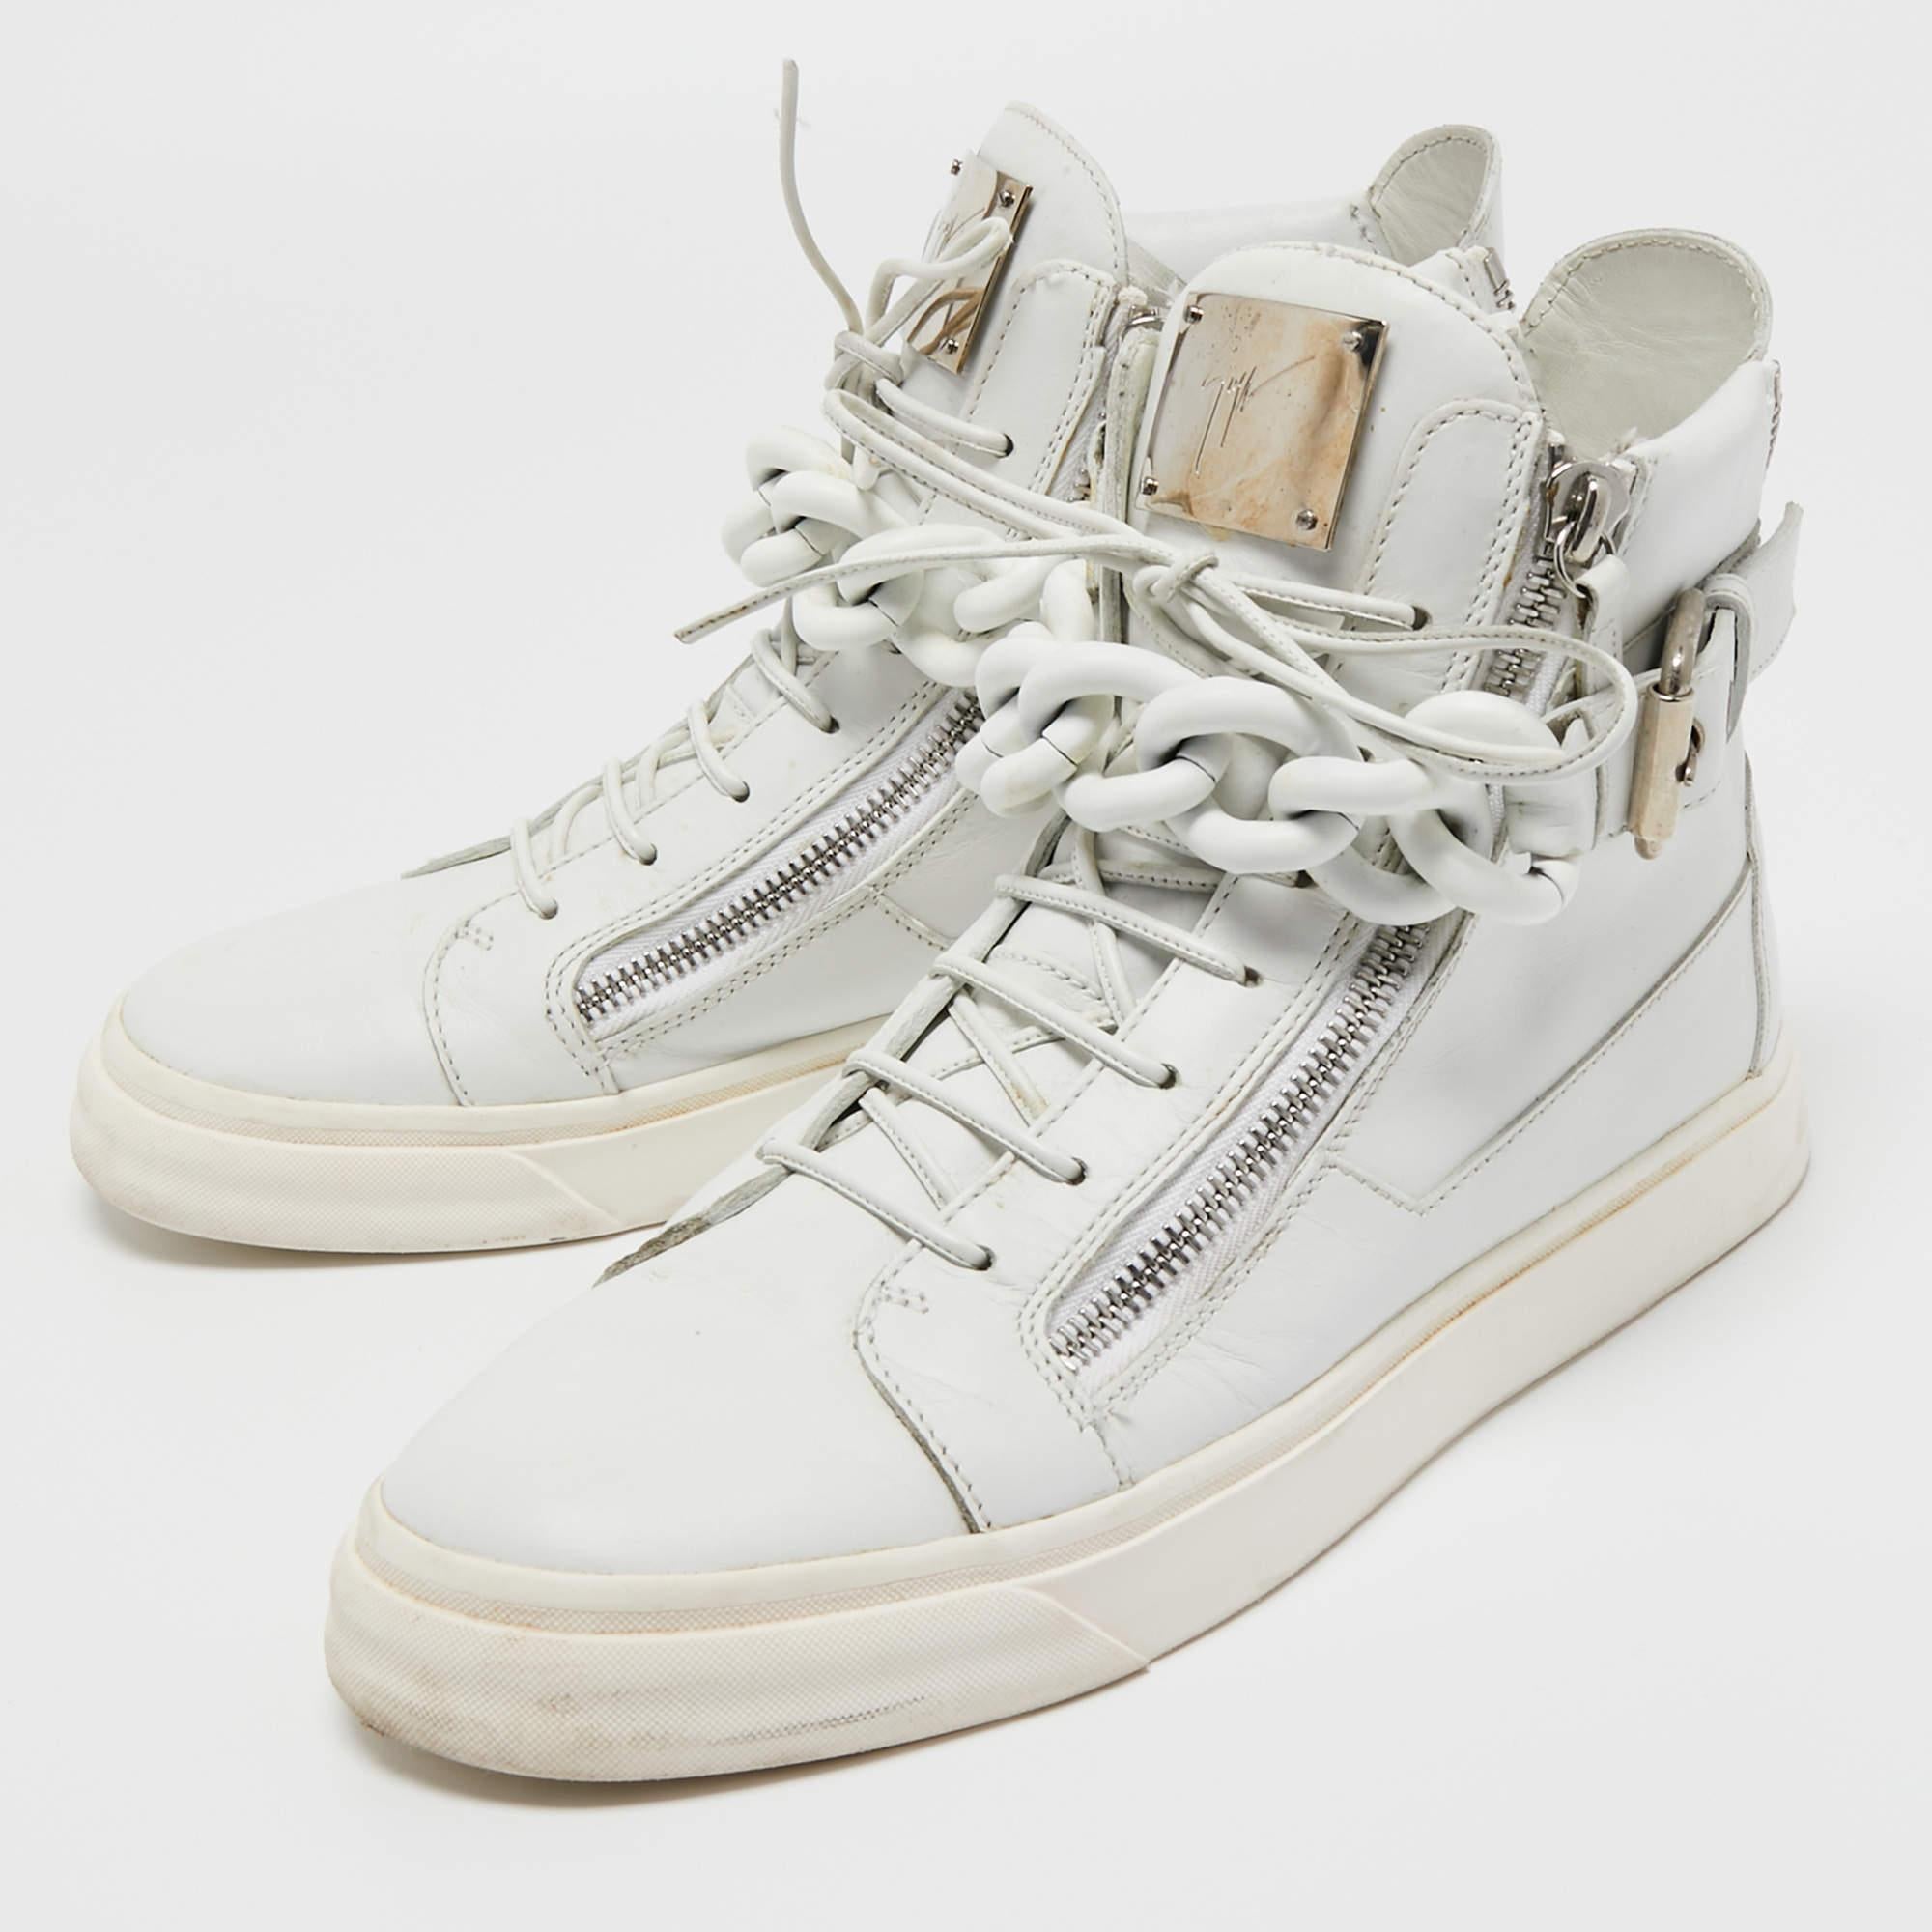 Giuseppe Zanotti brings you these sneakers that are super sturdy, stunning, and stylish. They are crafted from white leather into a classic high-top silhouette. They are highlighted with zipper fastenings, metal chain detailing, and silver-tone